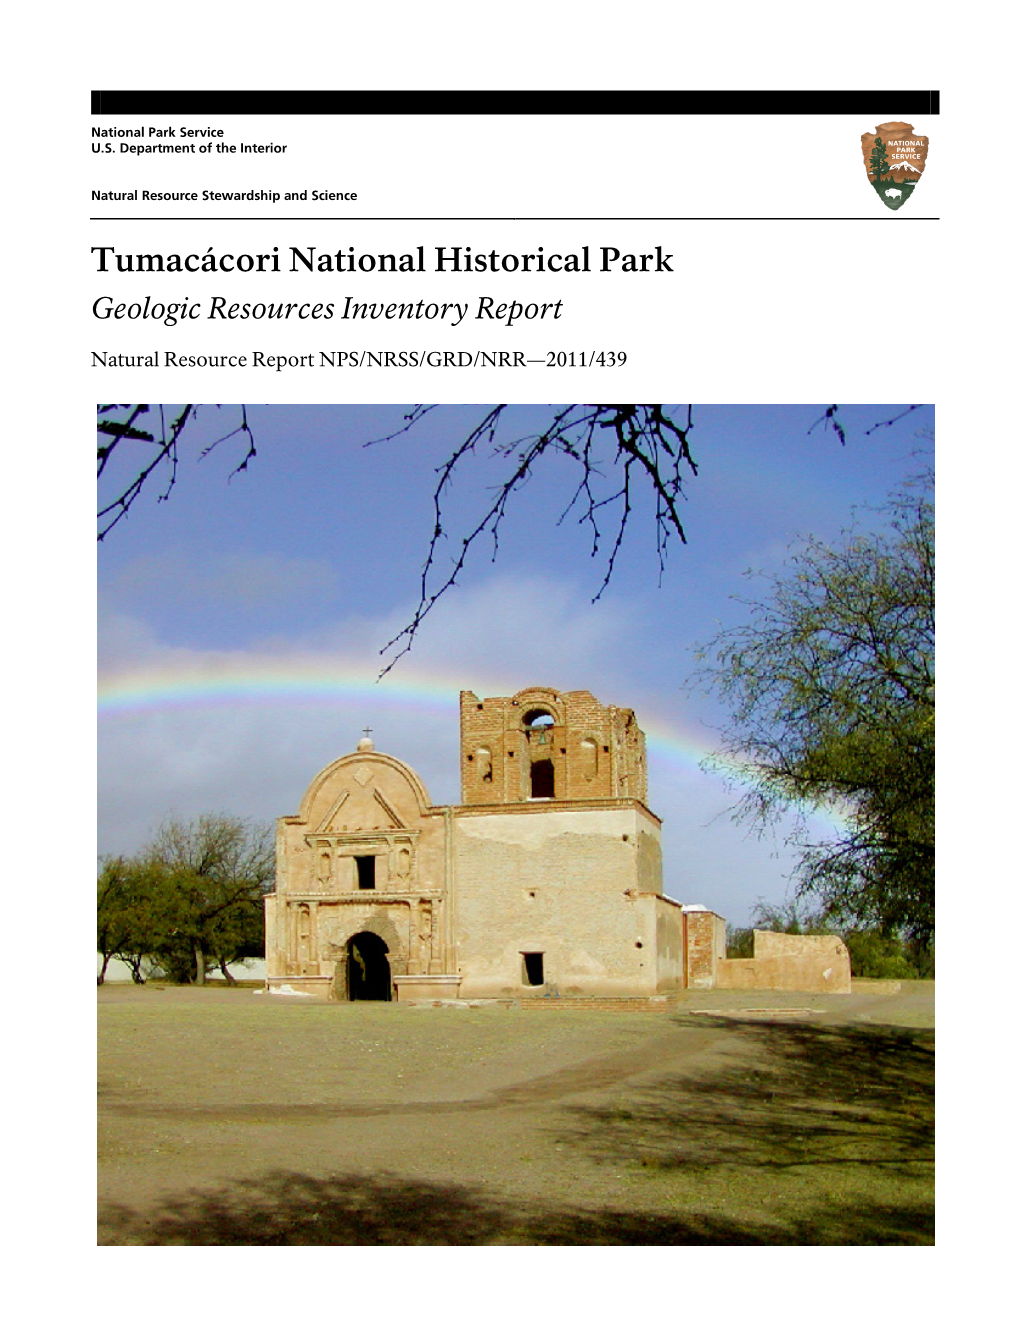 Geologic Resources Inventory Report